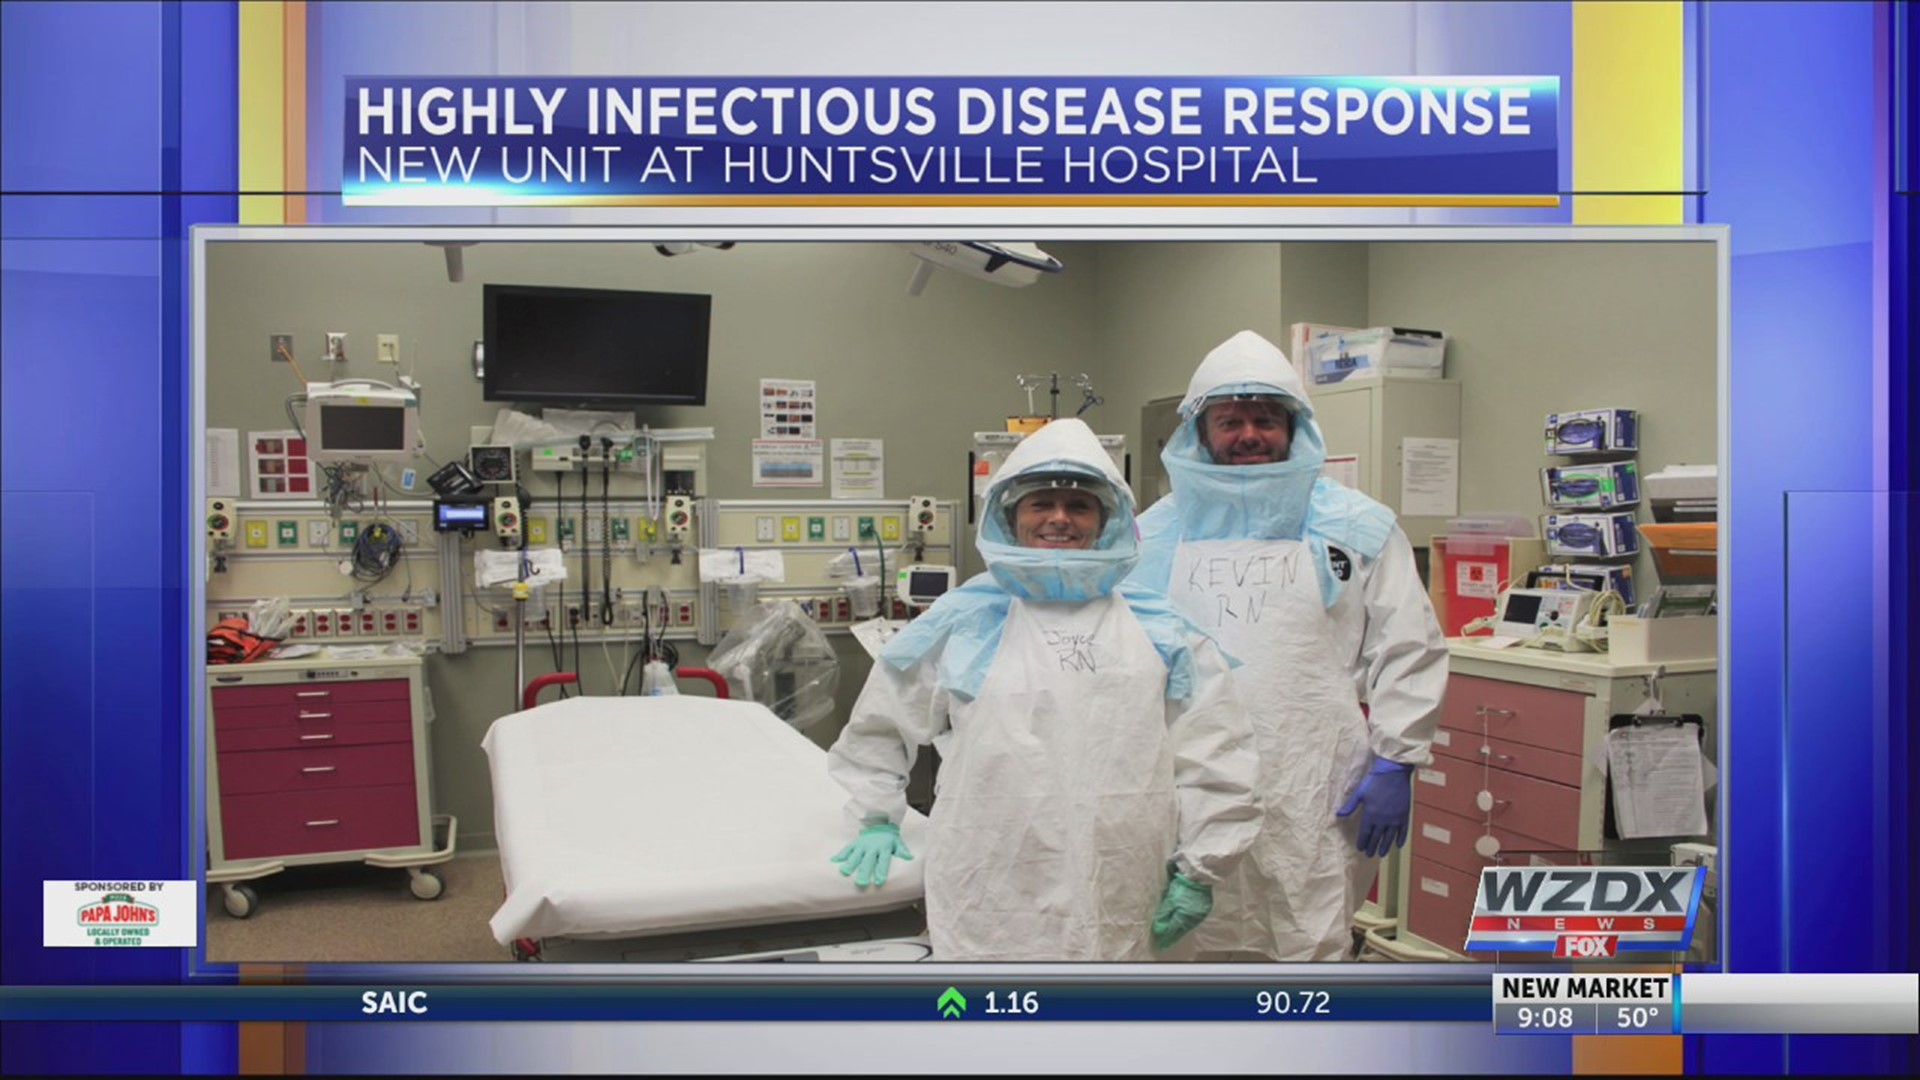 The new Highly Infectious Disease Response Unit is now in place at the hospital, thanks to a grant from the Alabama Department of Public Health. In a post announcing the new unit, the Huntsville Hospital Foundation said if there's ever a case of Ebola, SARS, or other infection disease in our region, the Huntsville Hospital ER is now equipped to handle it.